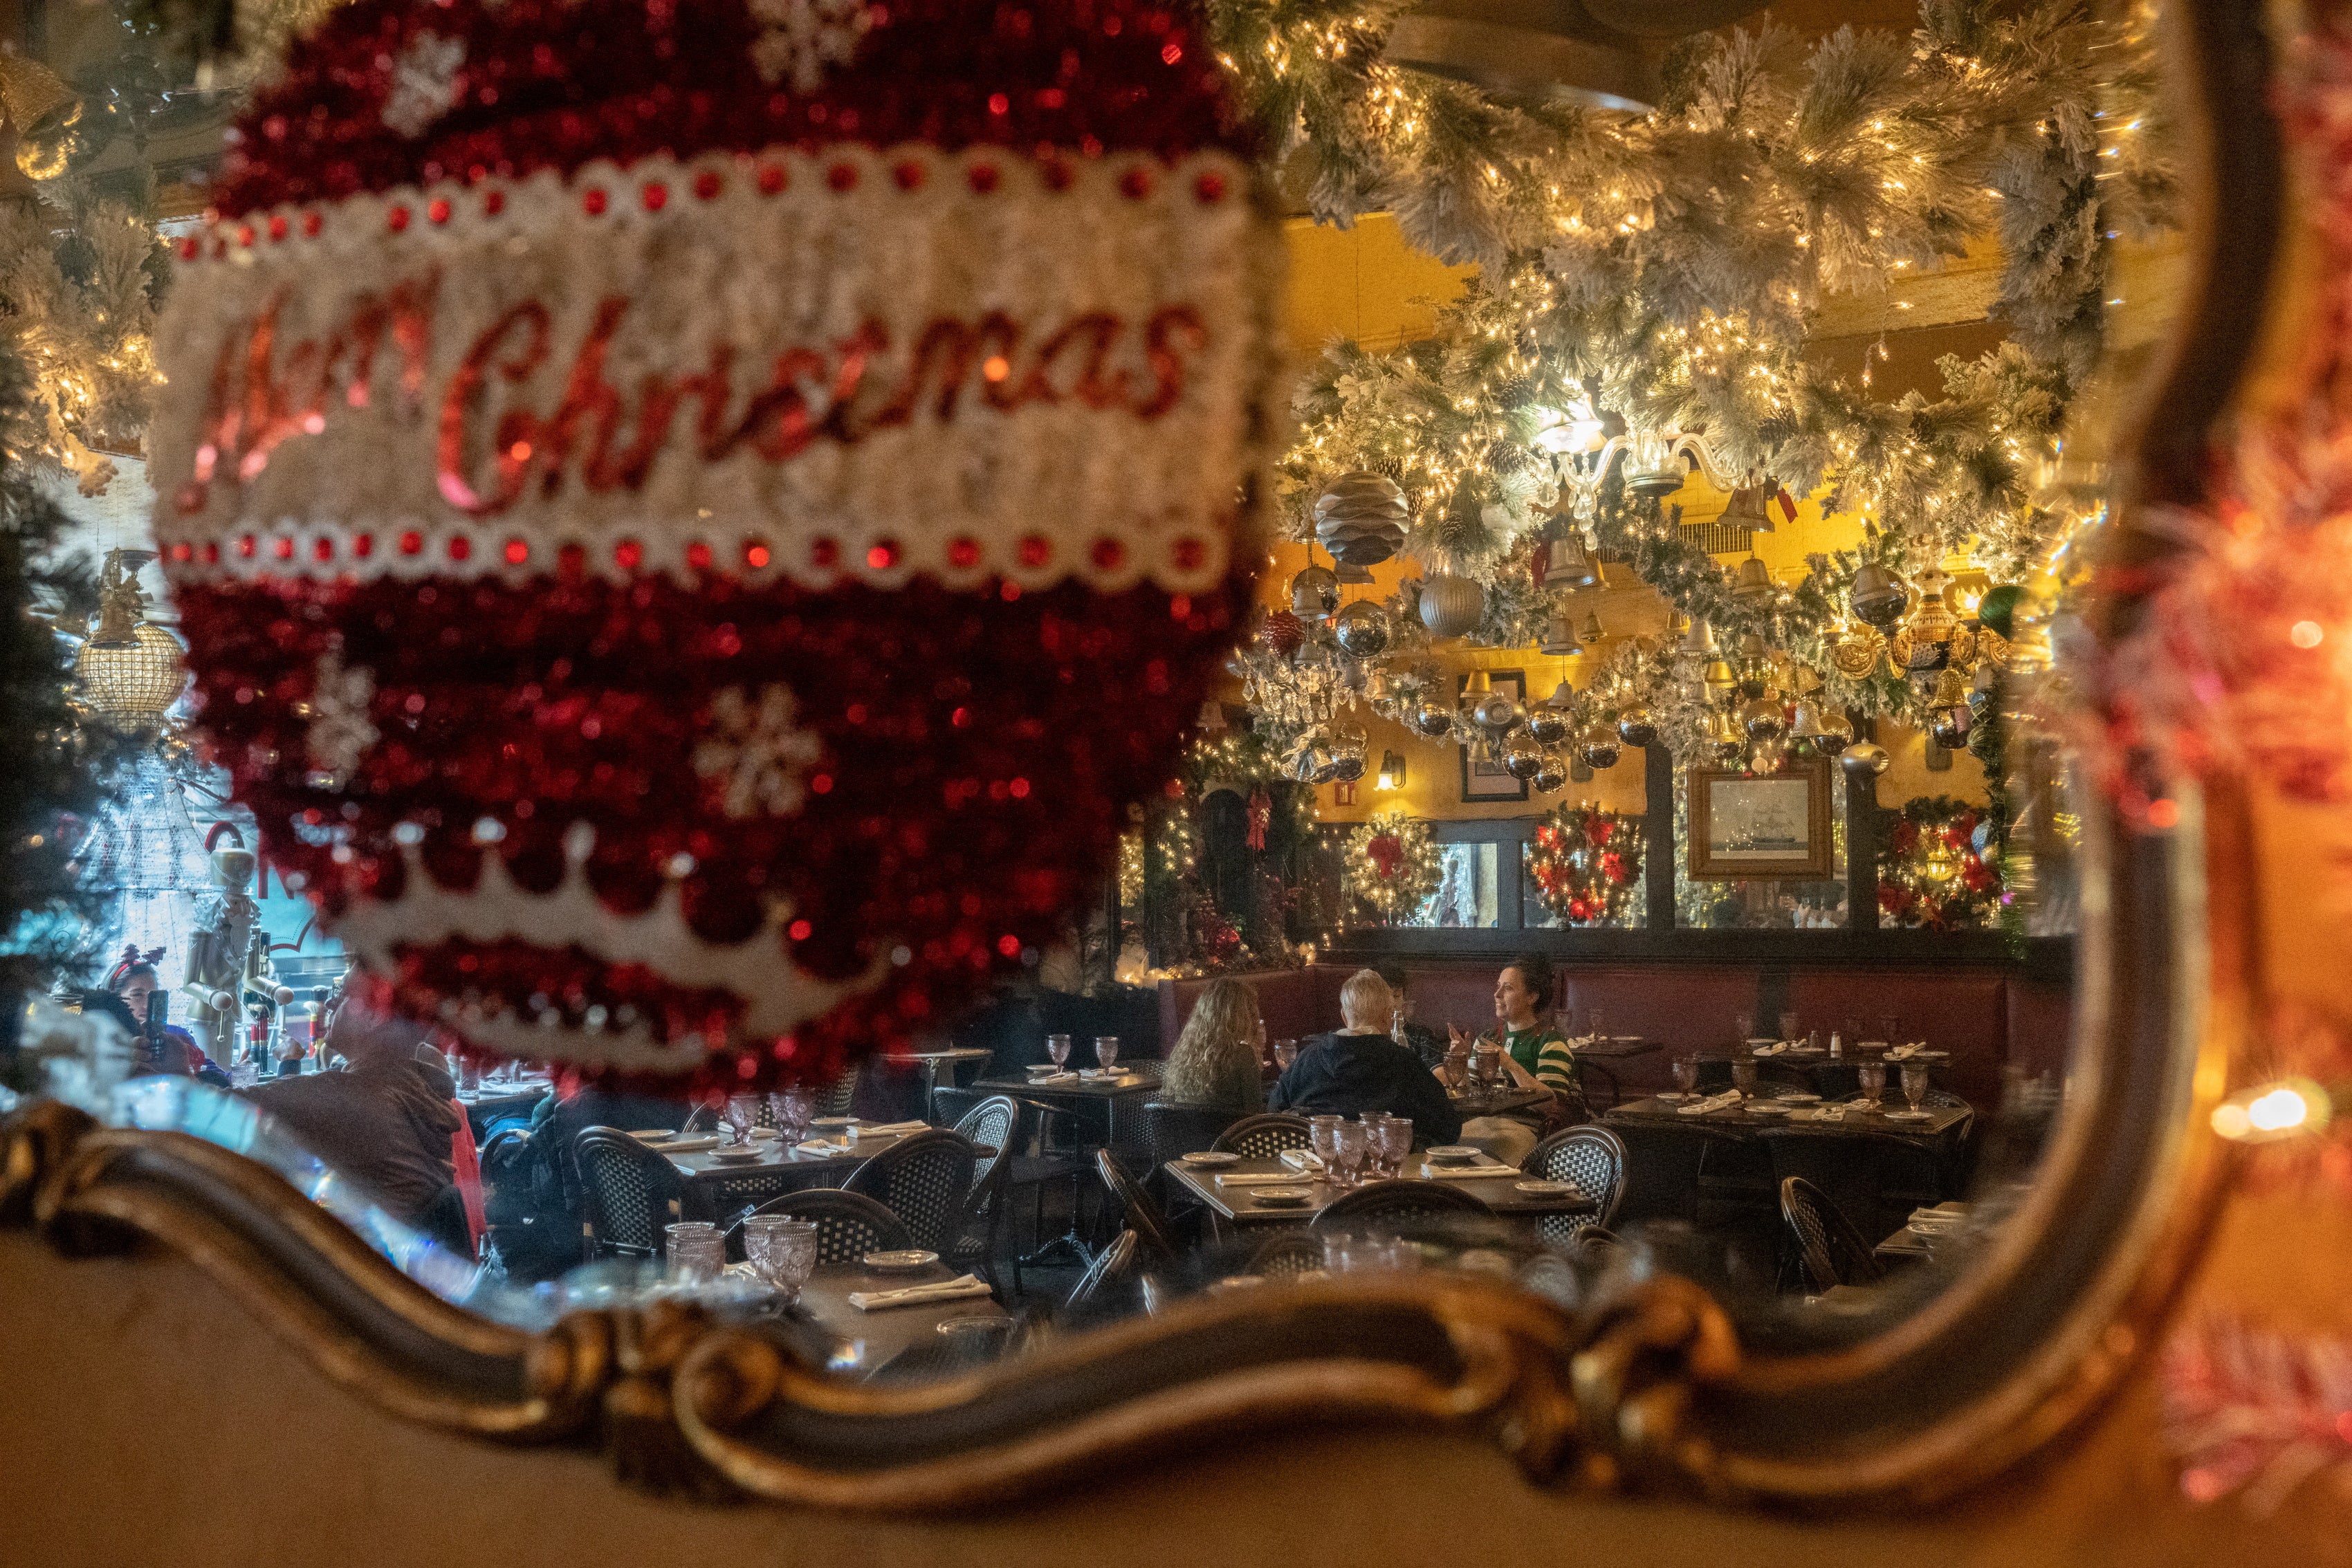 People reflected in a mirror at a restaurant on Christmas Eve in the US this year